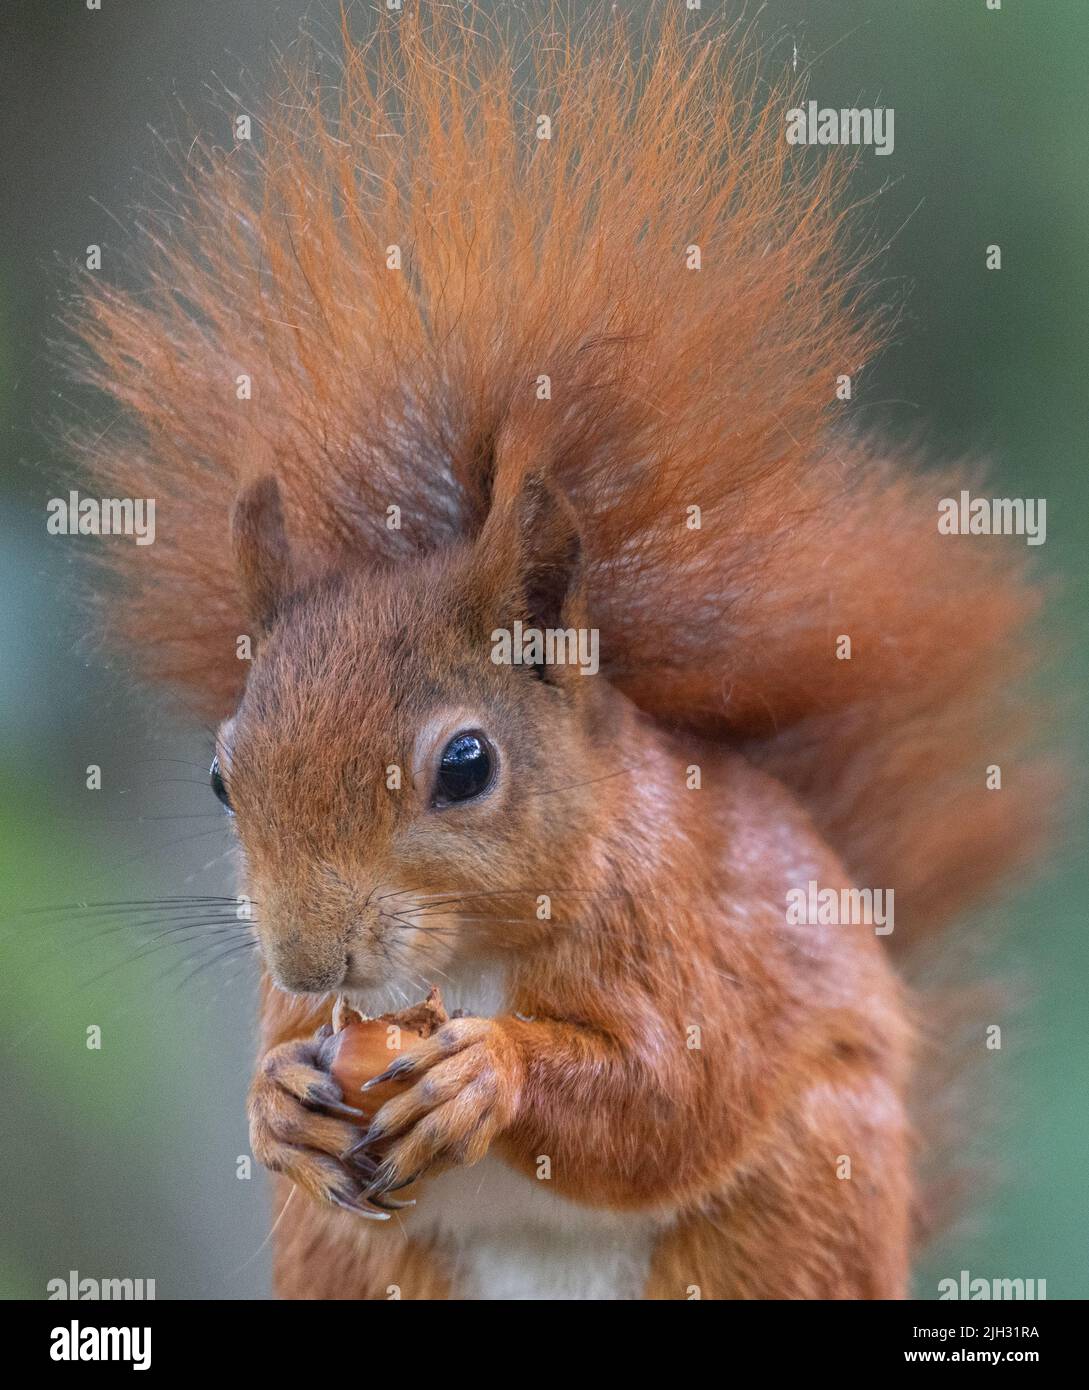 A wild red squirrel eating a hazelnut Stock Photo